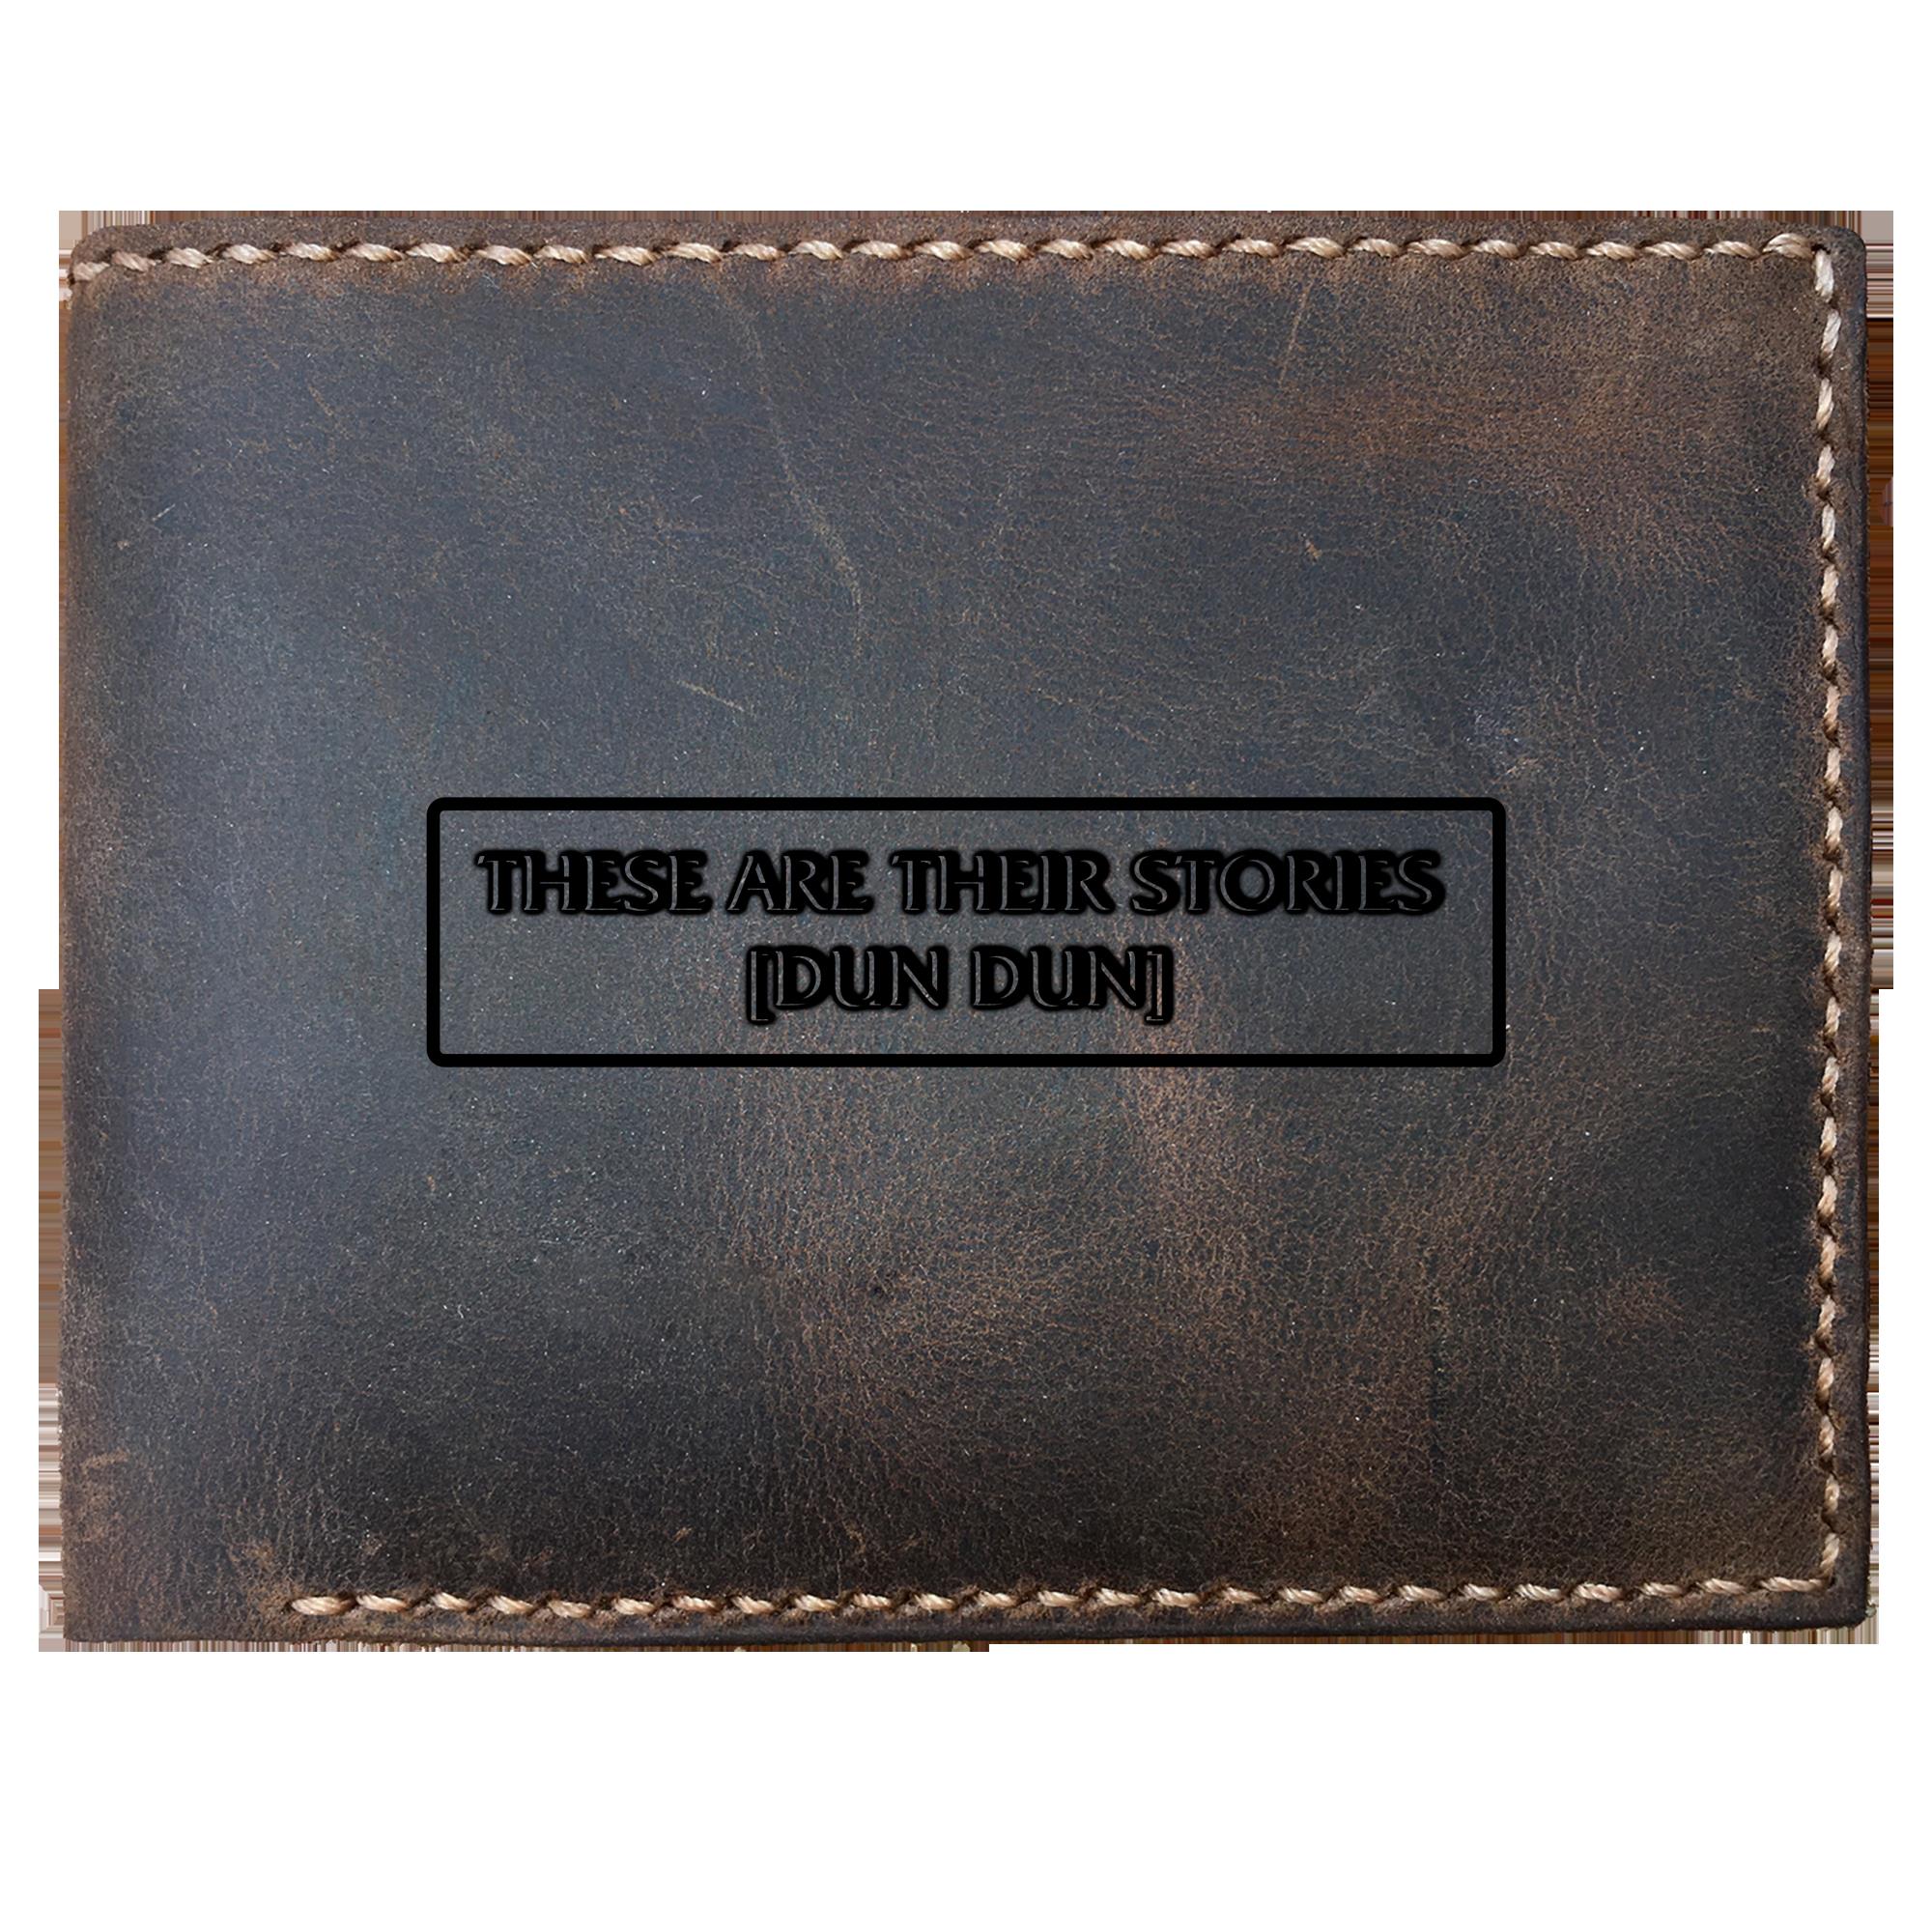 Skitongifts Funny Custom Laser Engraved Bifold Leather Wallet For Men, These Are Their Stories Dun Dun Funny